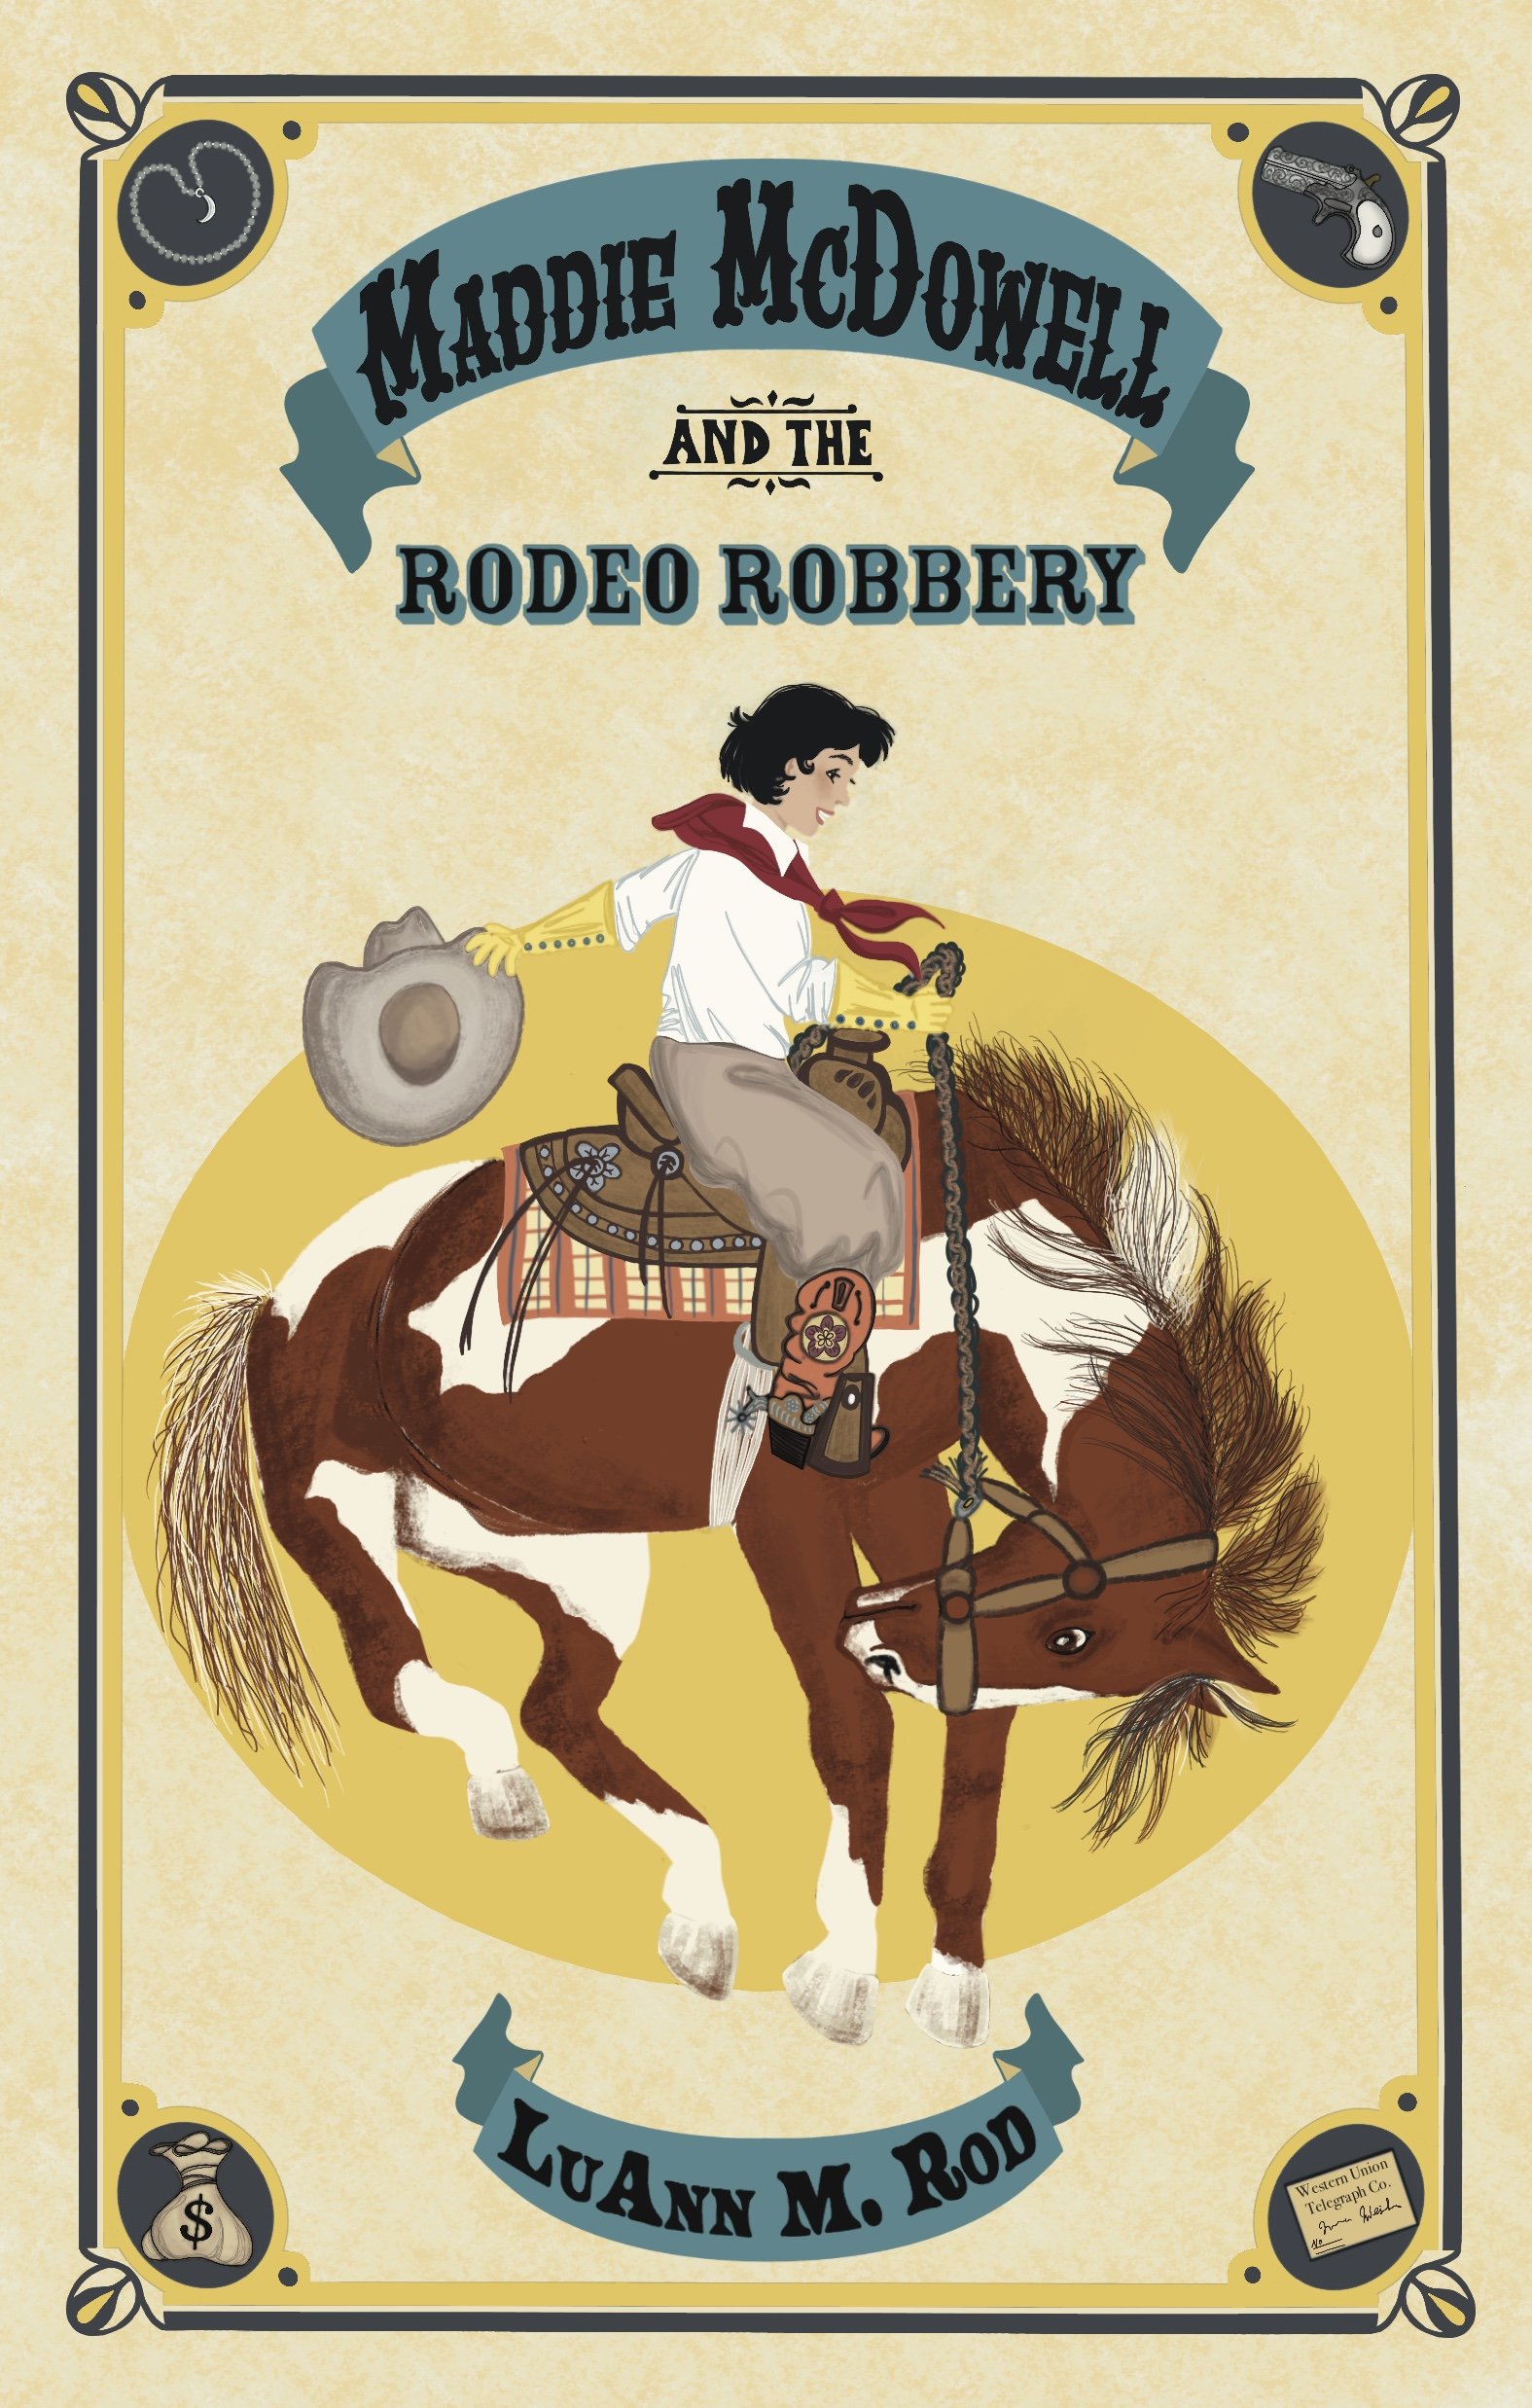 MADDIE MCDOWELL AND THE RODEO ROBBERY by LuAnn M. Rod